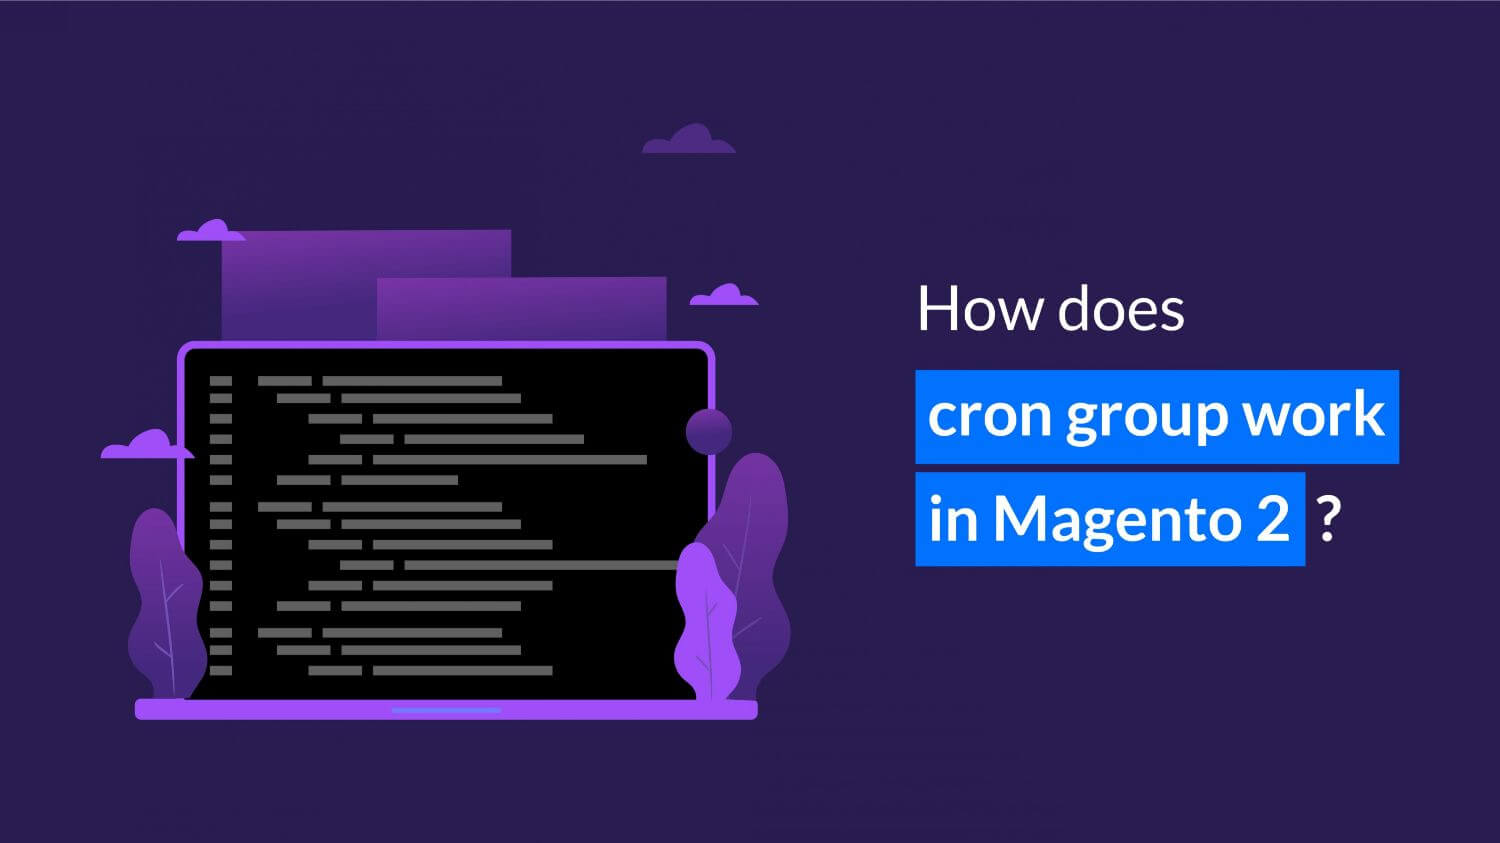 How does the cro job work in Magento 2 title image